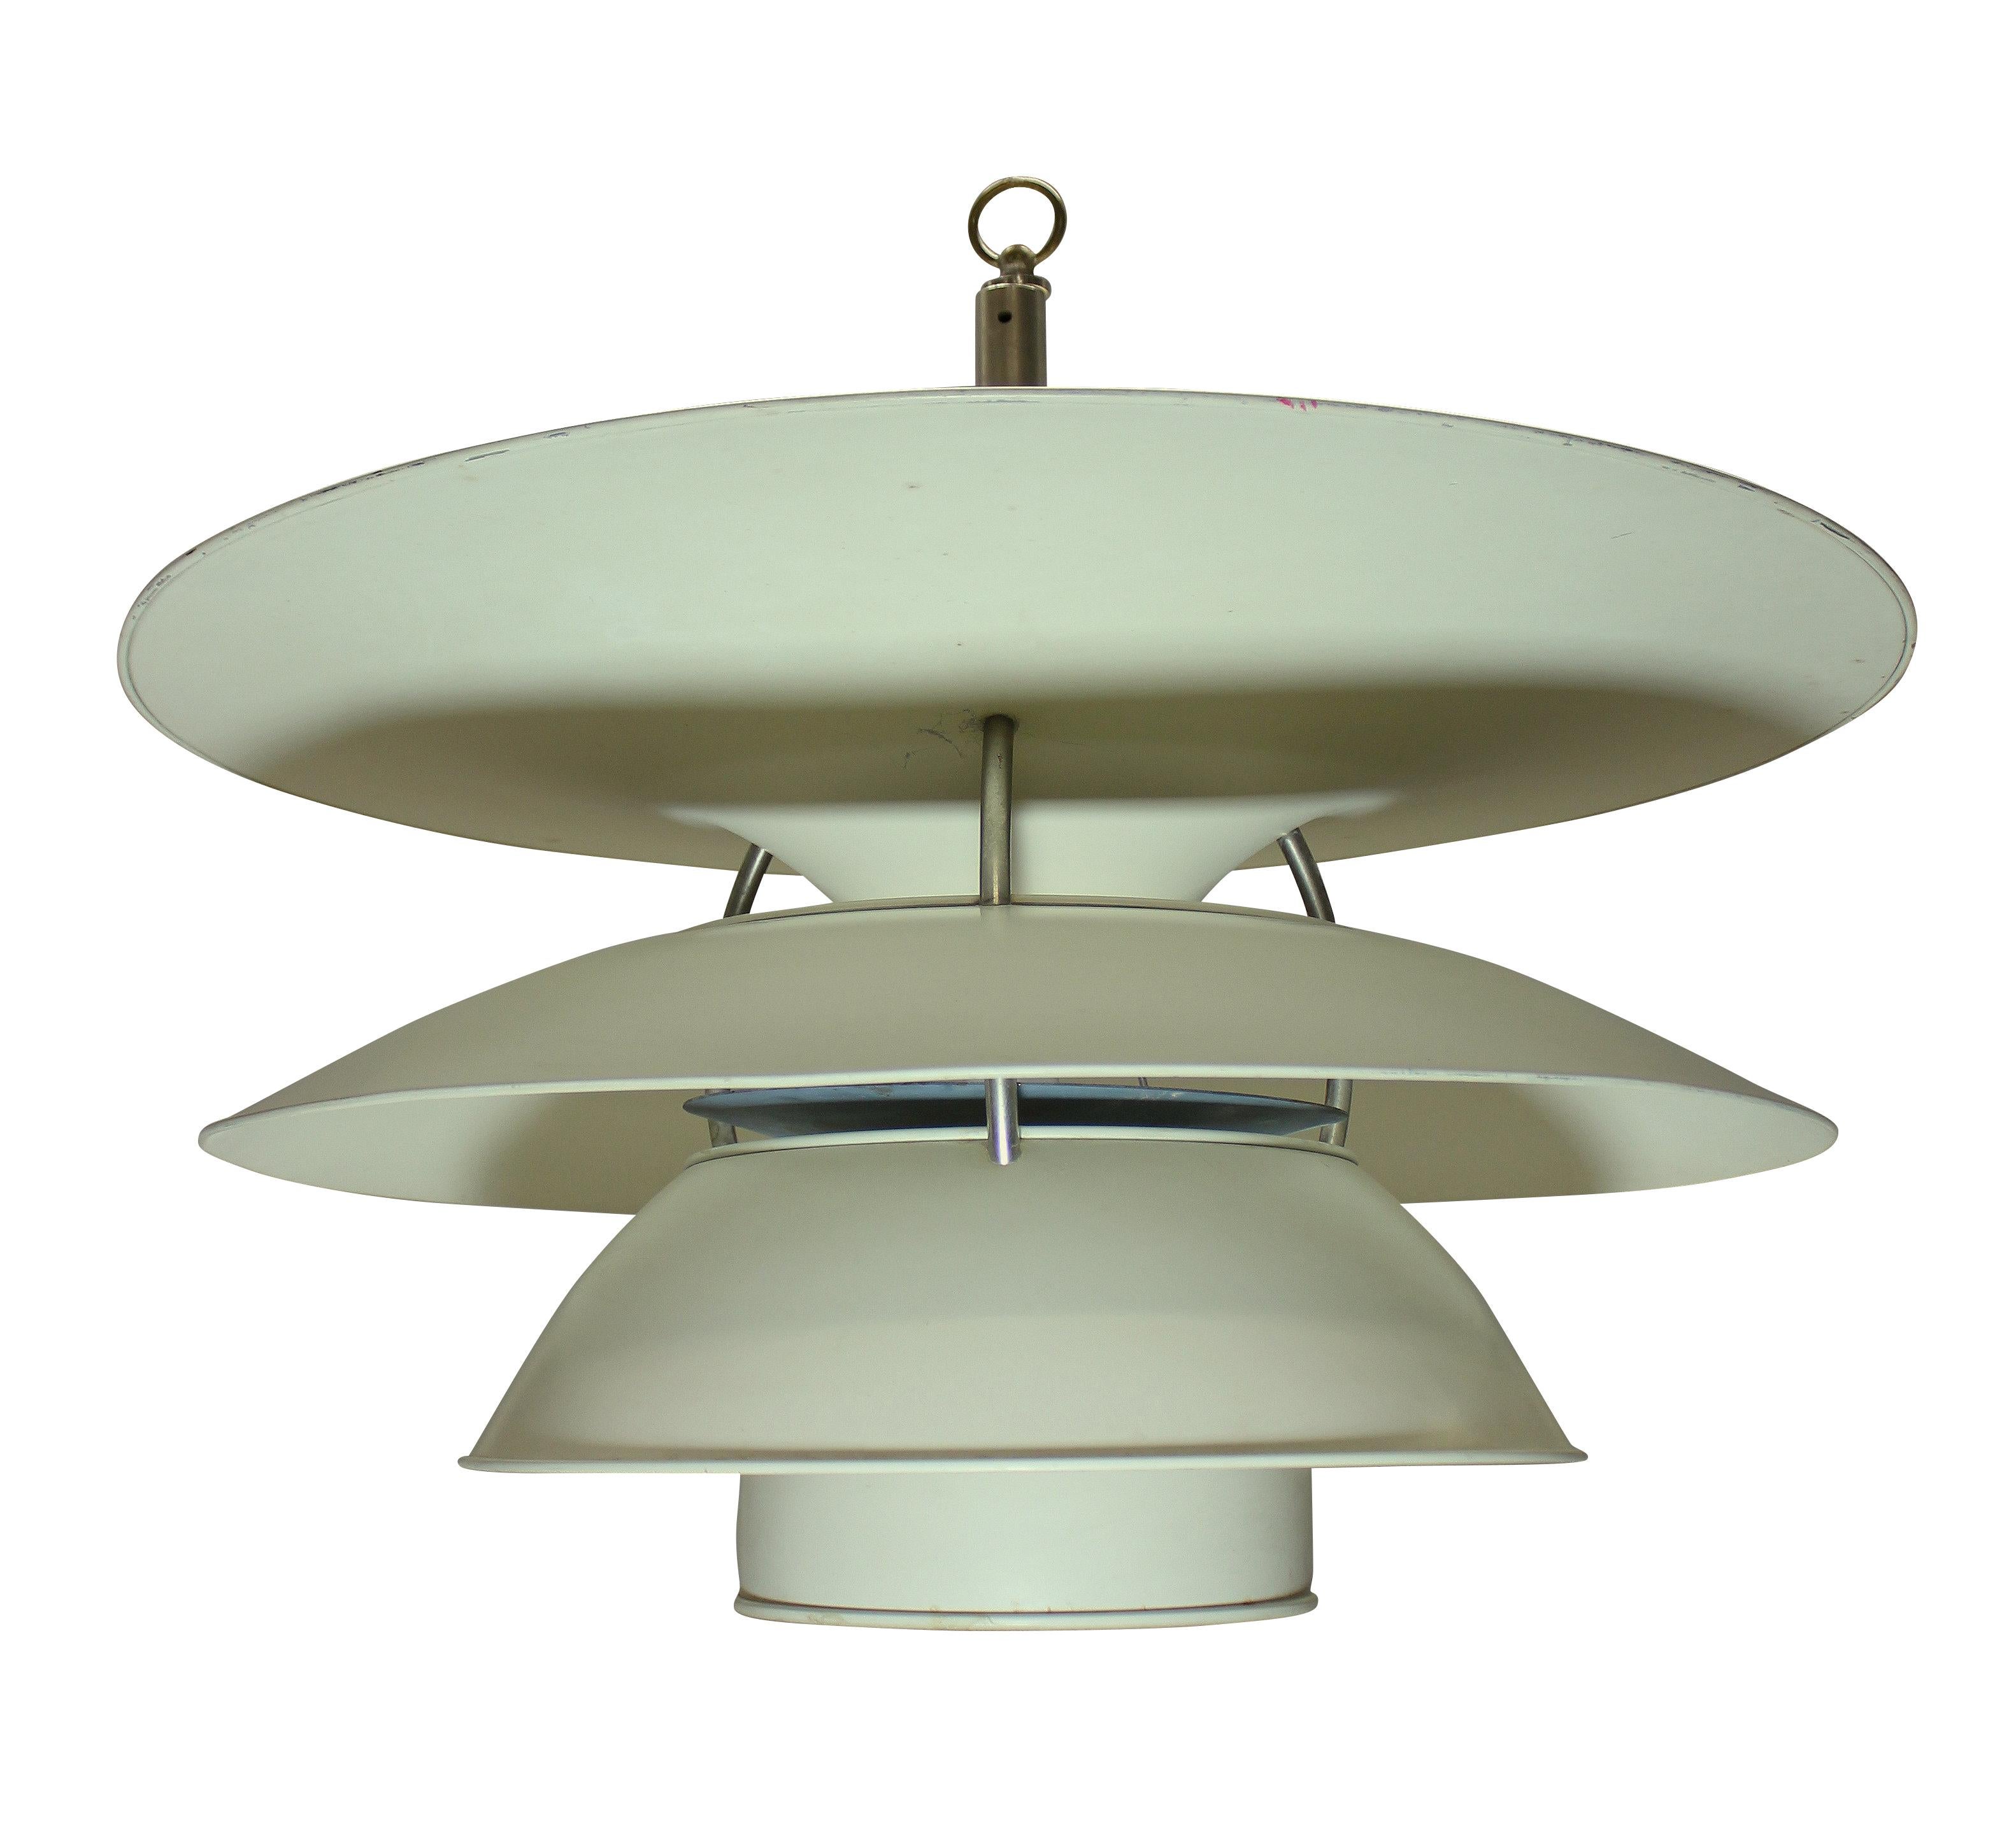 A Danish pendant light by Louis Poulsen. This is an original light, which has been much copied, with a good patina.